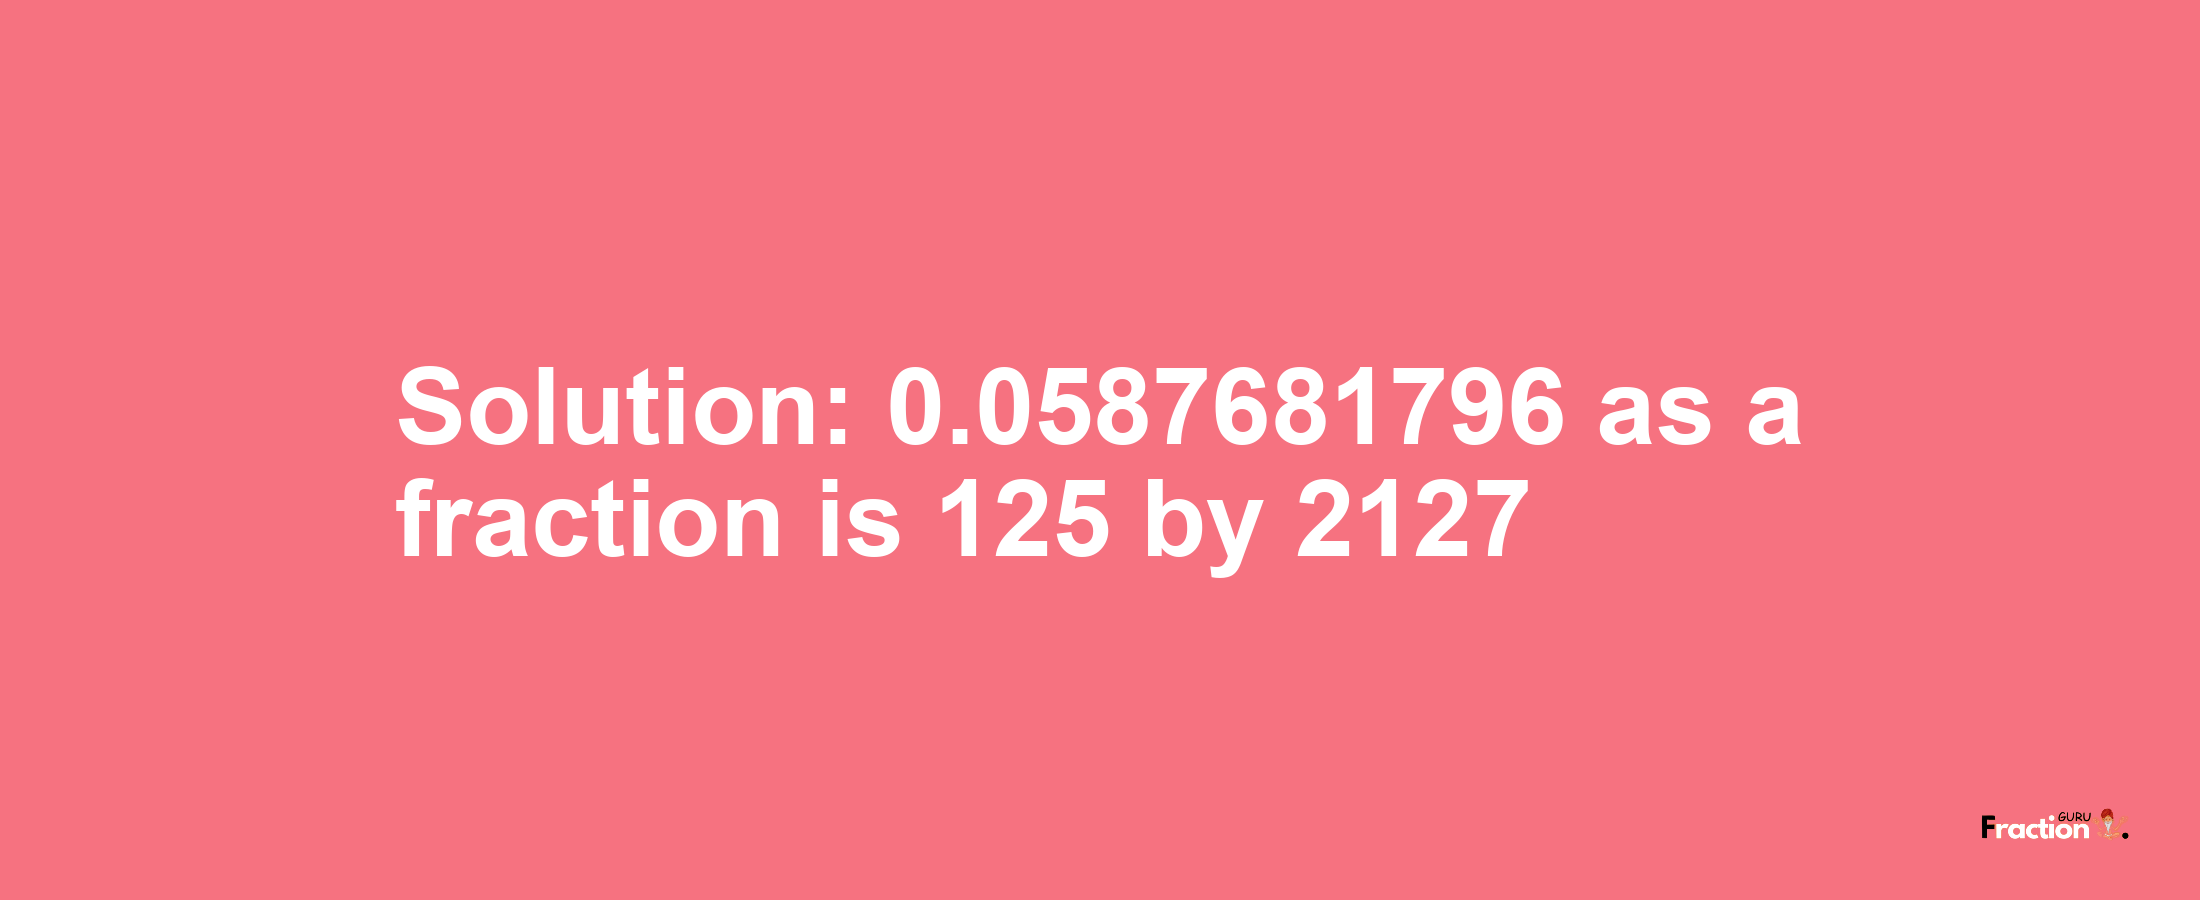 Solution:0.0587681796 as a fraction is 125/2127